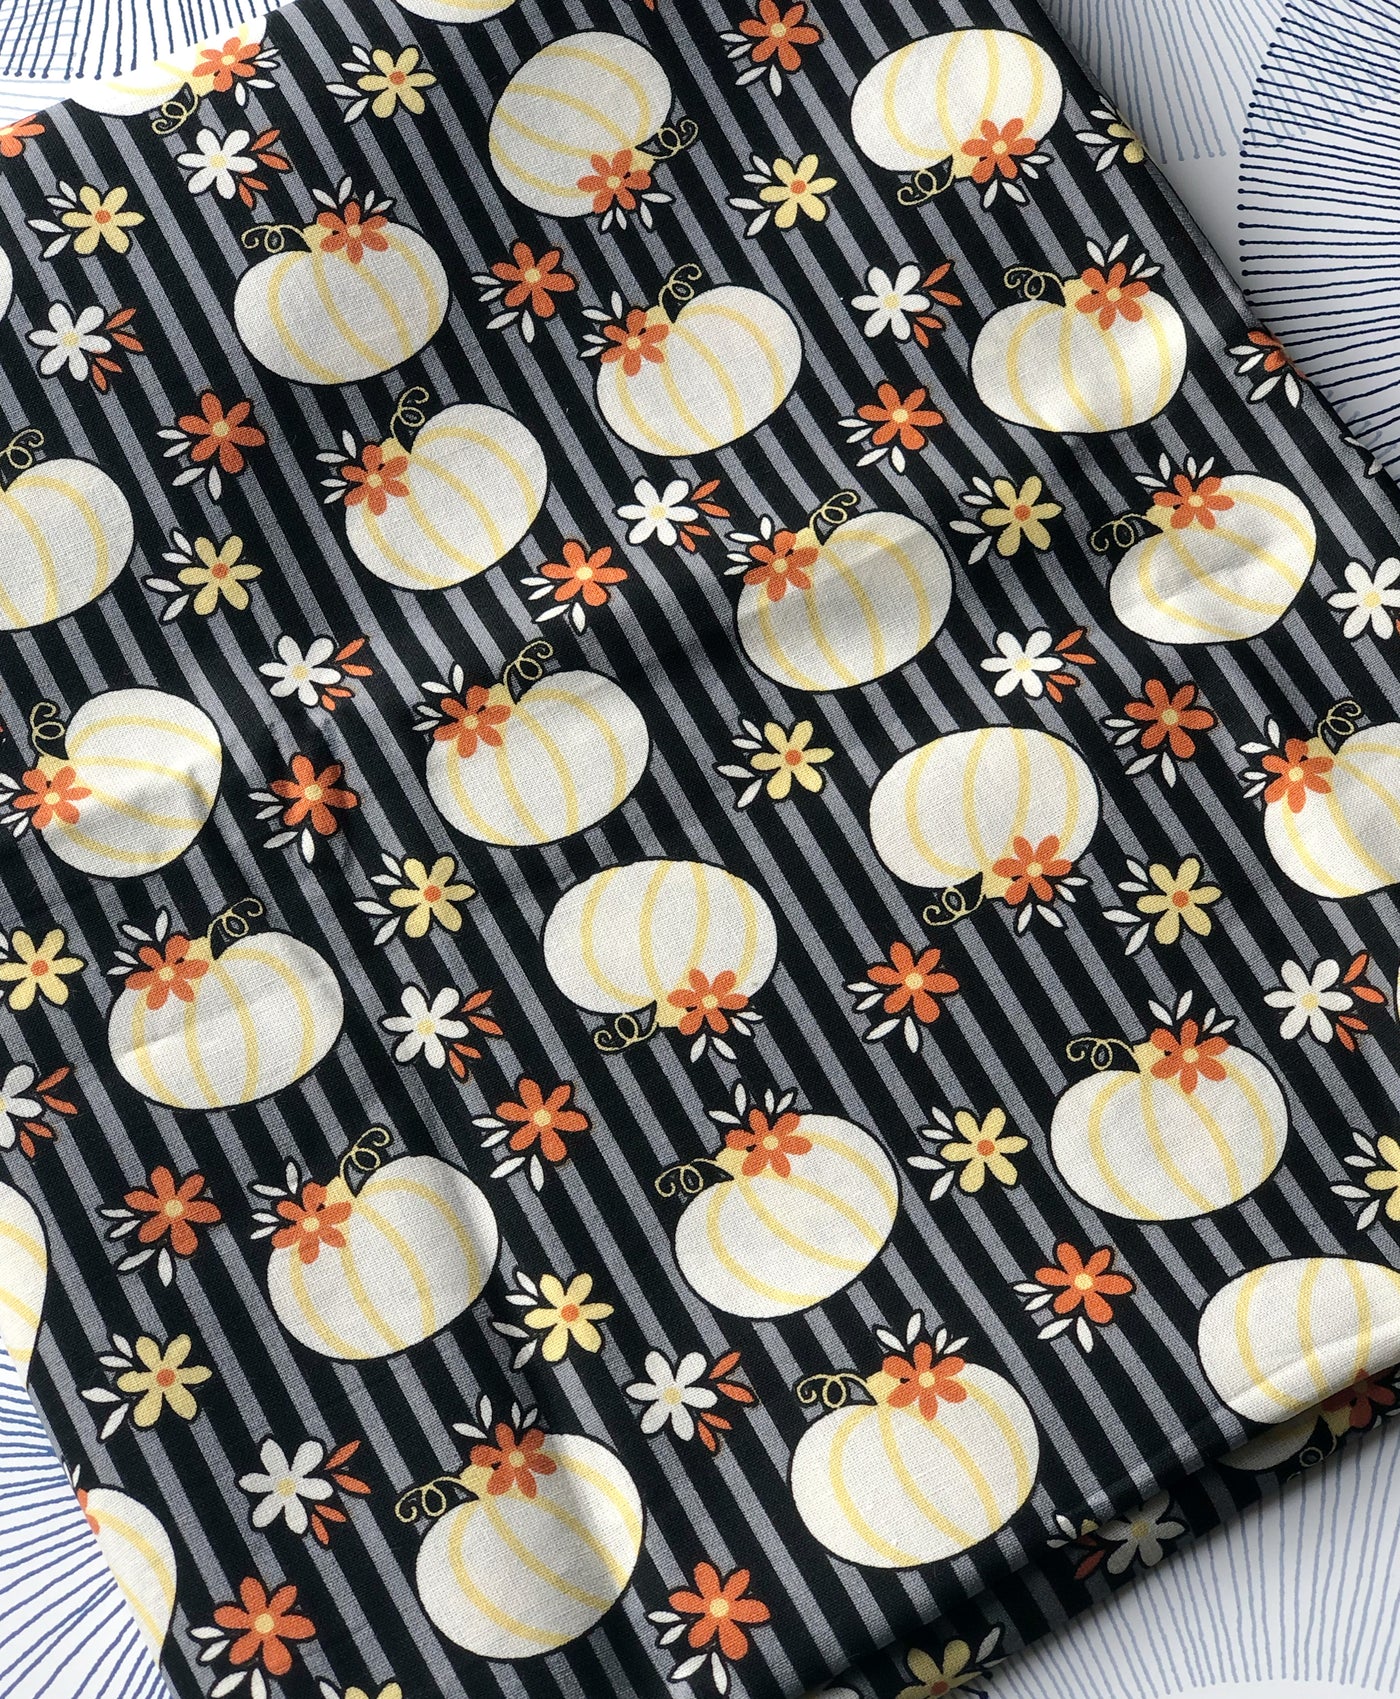 Cotton Face Mask with Filter Pocket - CHEERY PUMPKIN FABRIC